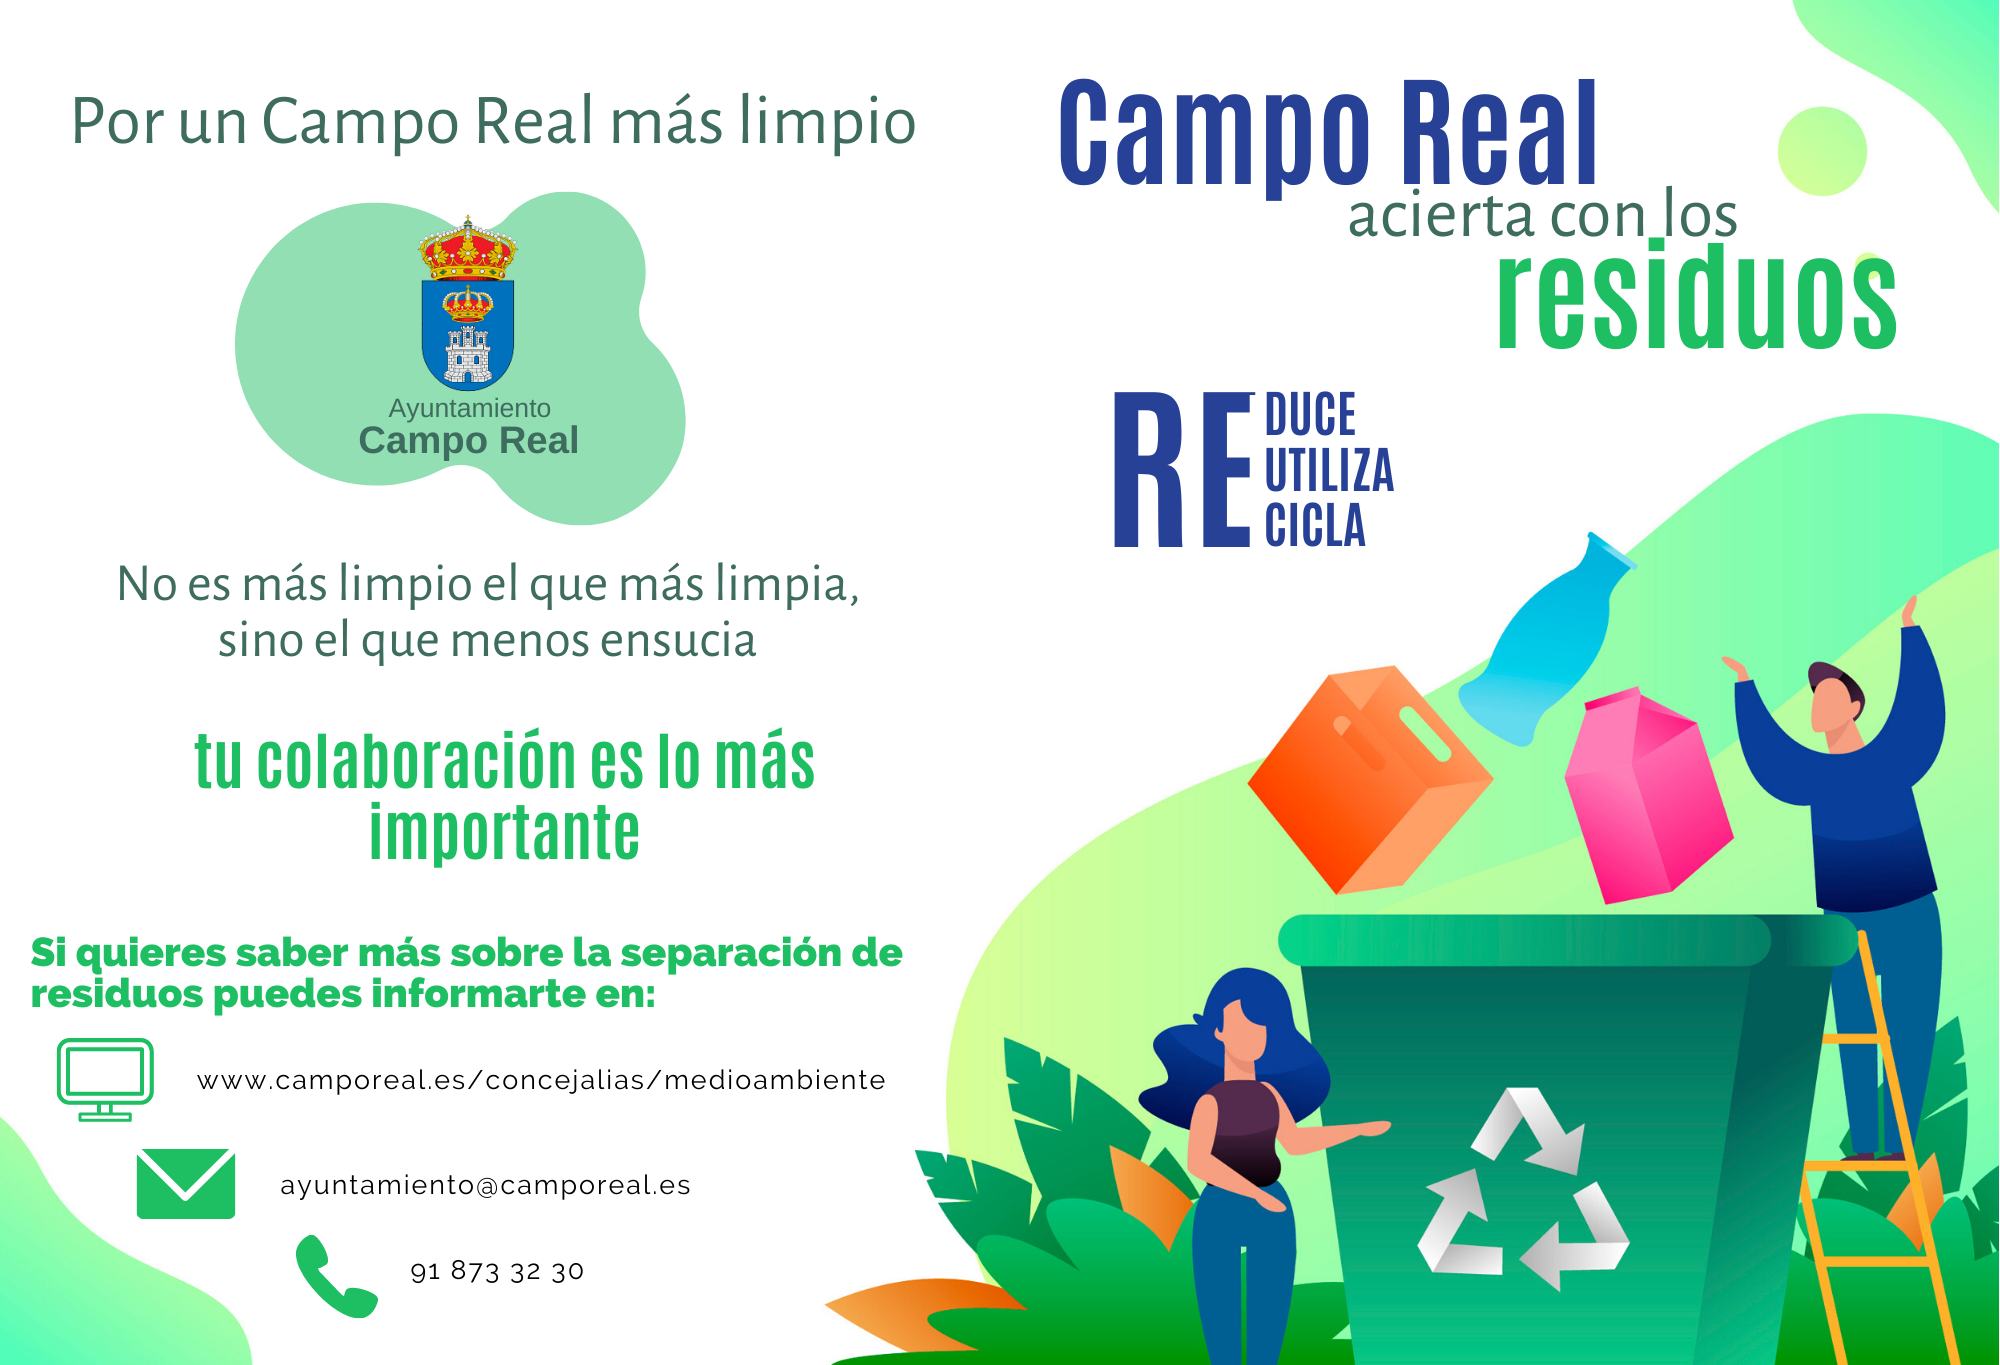 Residuos_Campo_Real1.png - 786.33 kB